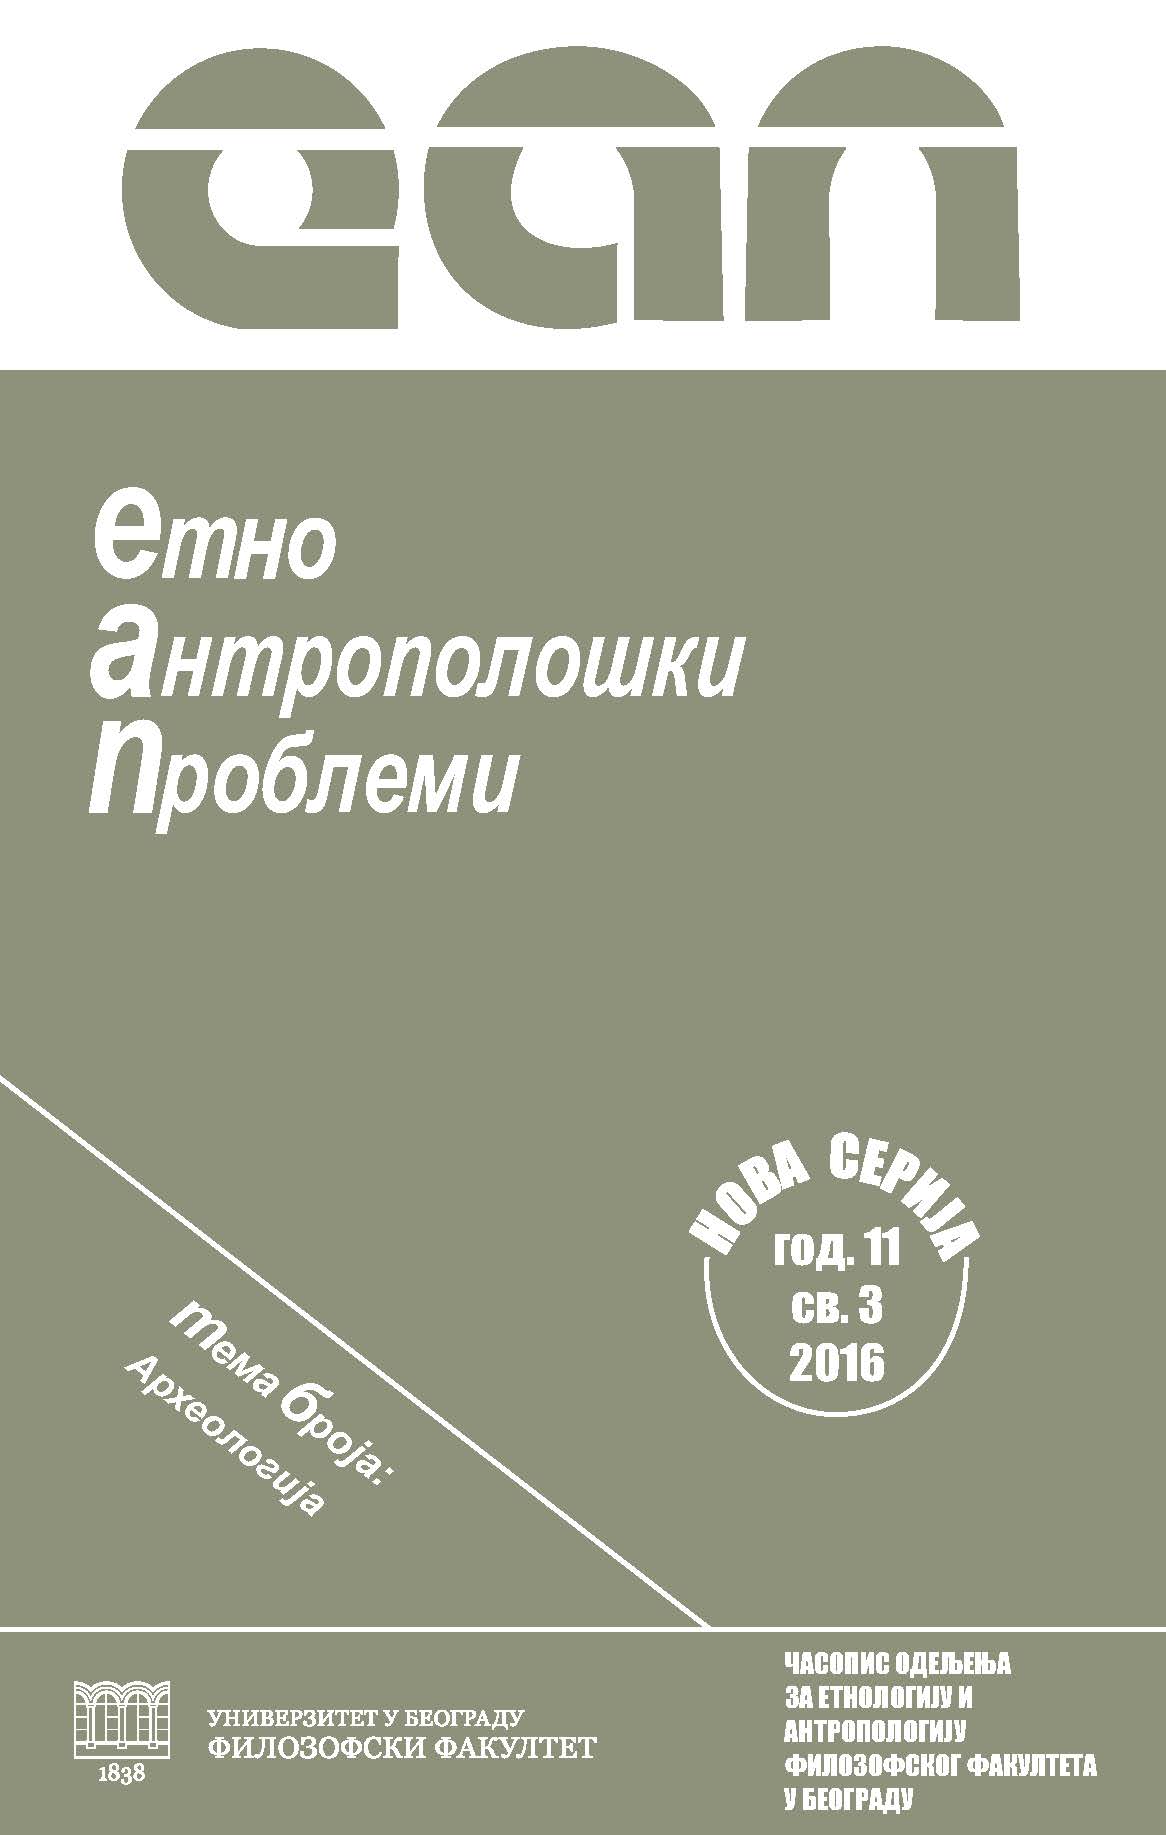 Permanent museum collections from alternative classrooms to tourist attractions:
Comparative analysis of visits to National Museum of Valjevo's collections in periods from 1951 to 1961 and from 2001 to 2011 Cover Image